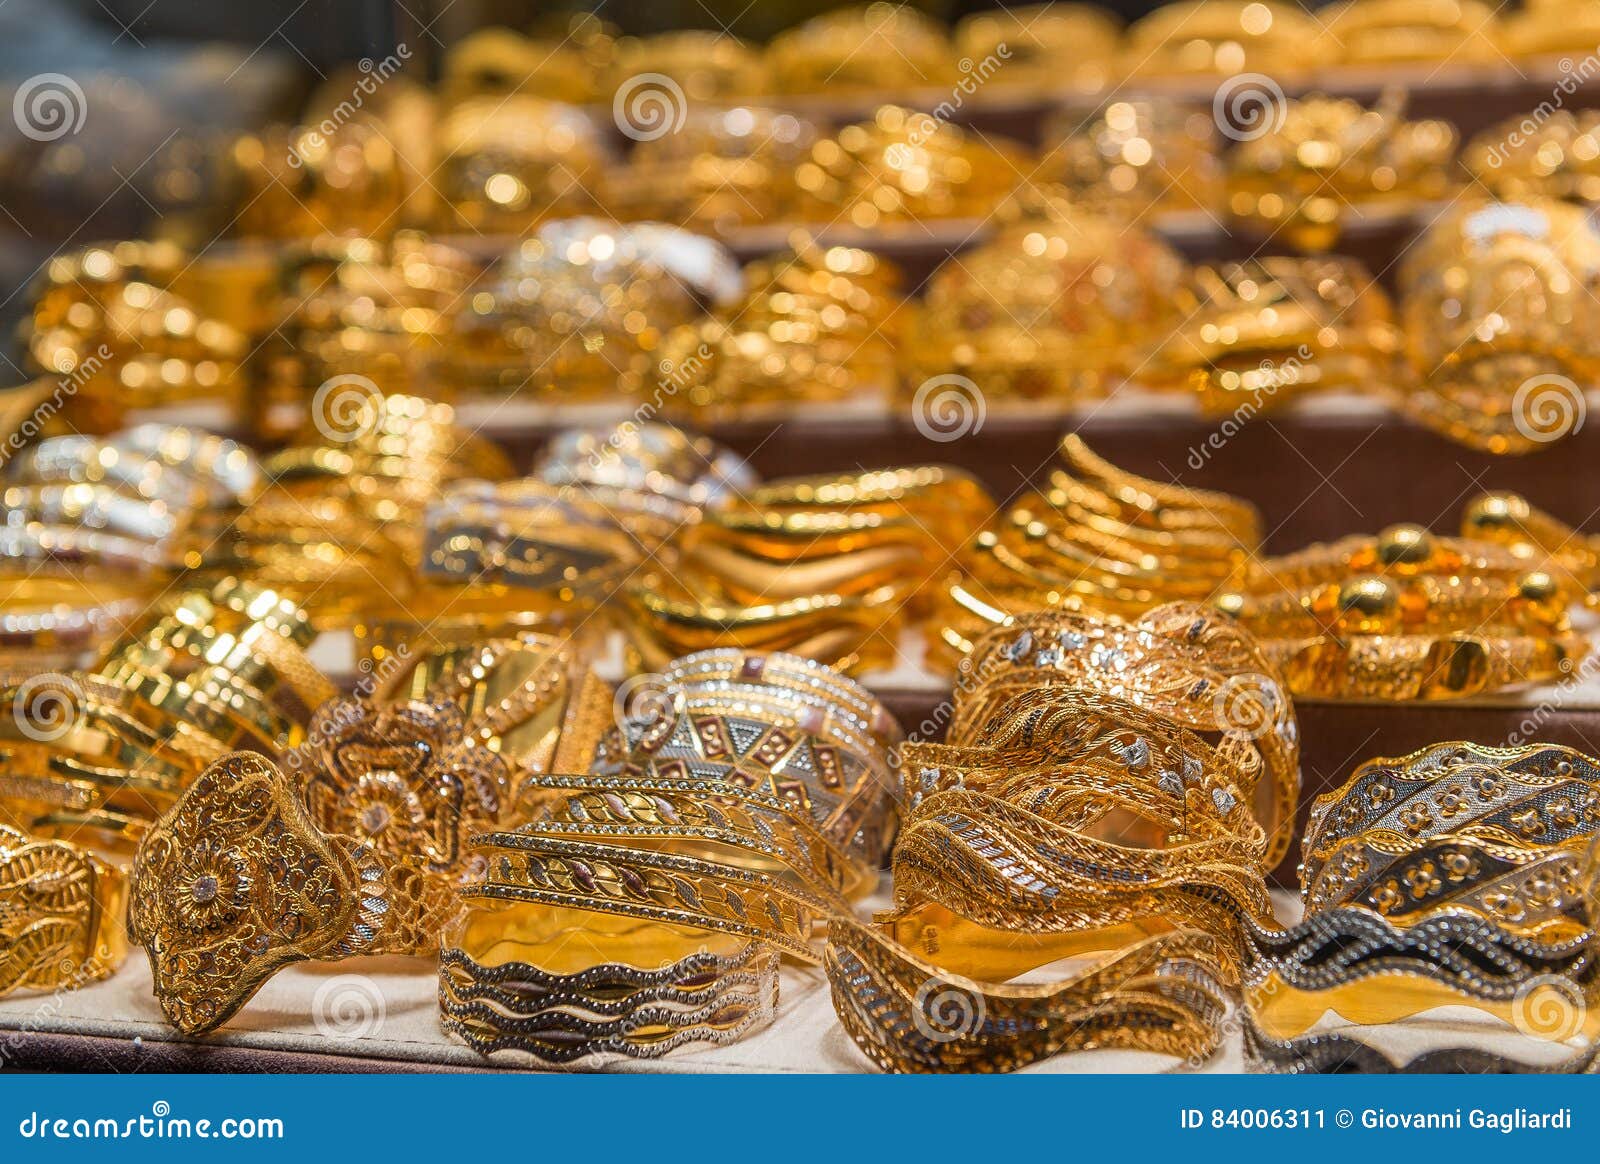 Gold on the Famous Golden Souk in Dubai Stock Image - Image of display ...